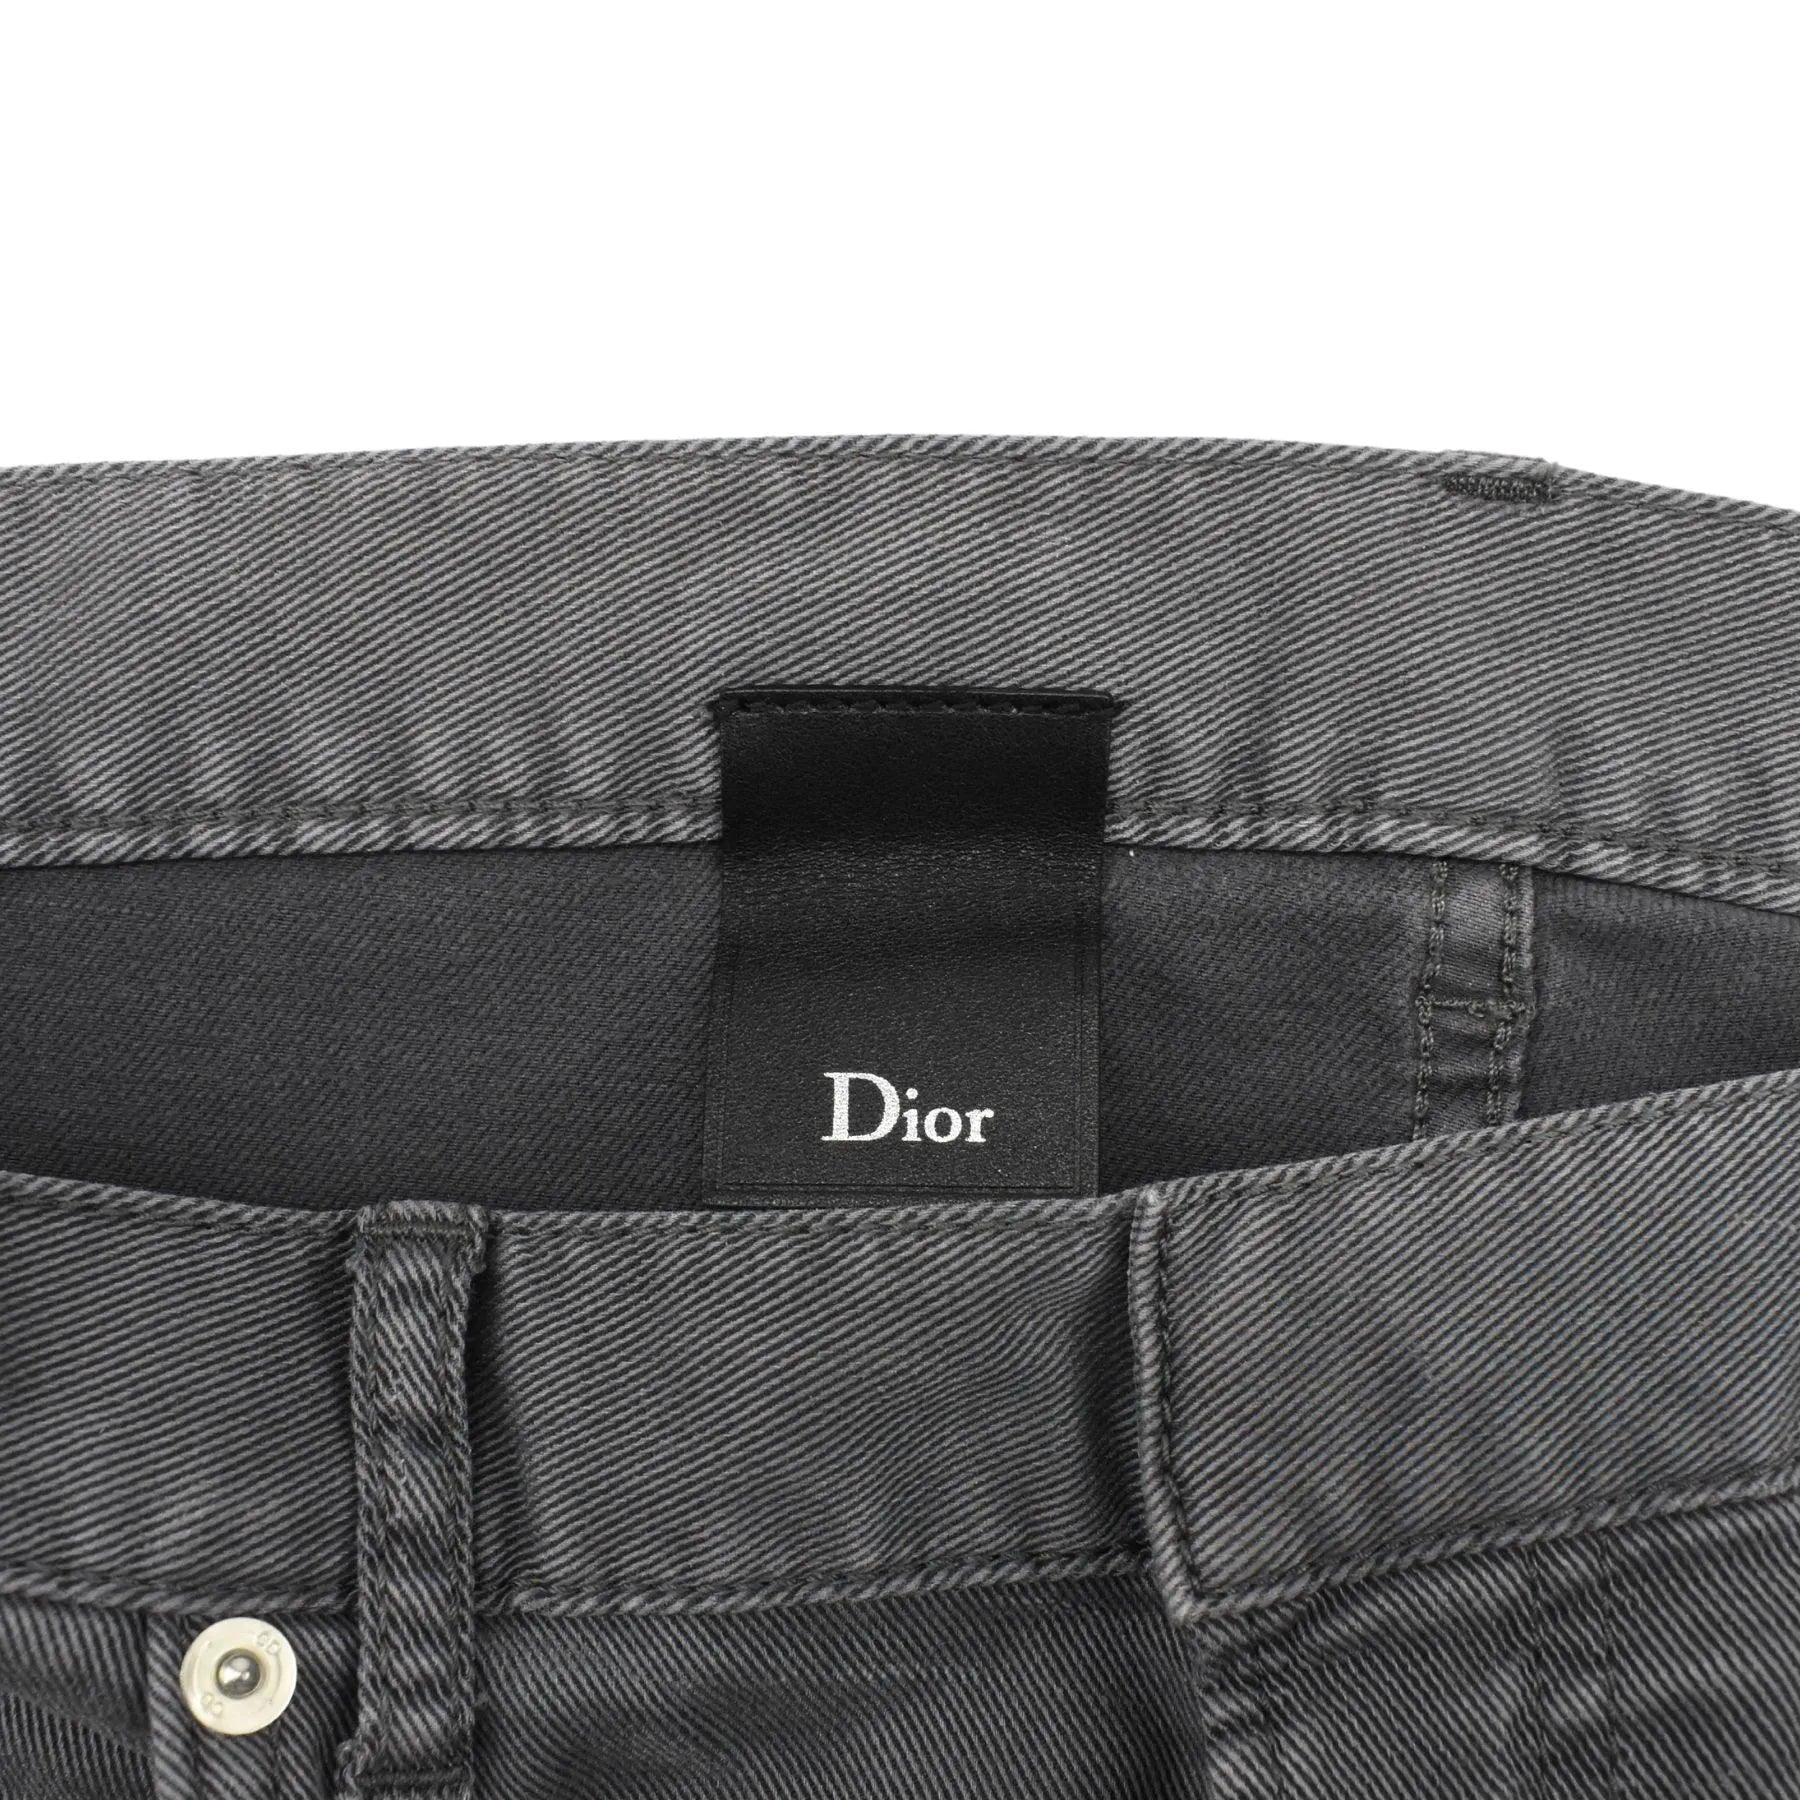 Christian Dior Jeans - Men's 33 - Fashionably Yours